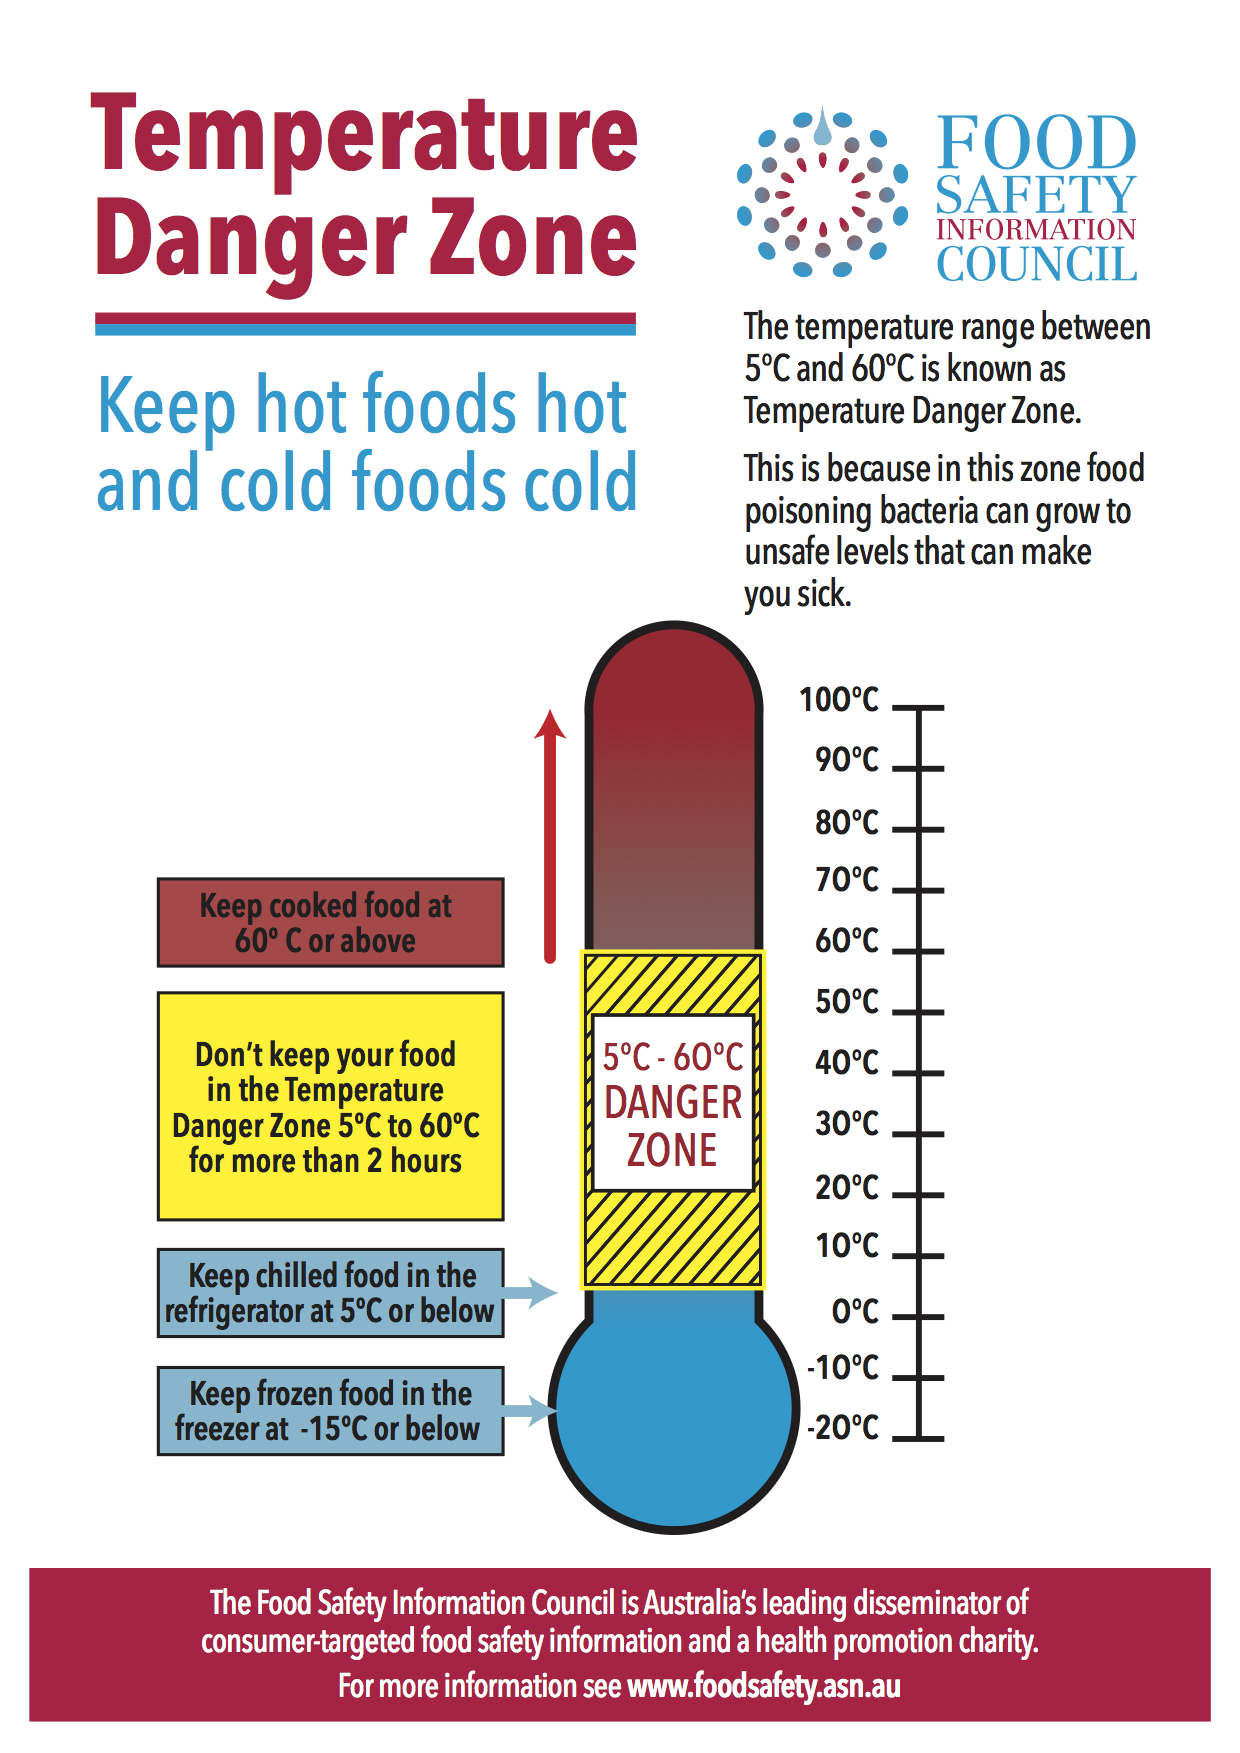 foodsafety.asn.au Temperature danger zone announced as theme for AFSW 2014  (22 September 2014) - foodsafety.asn.au